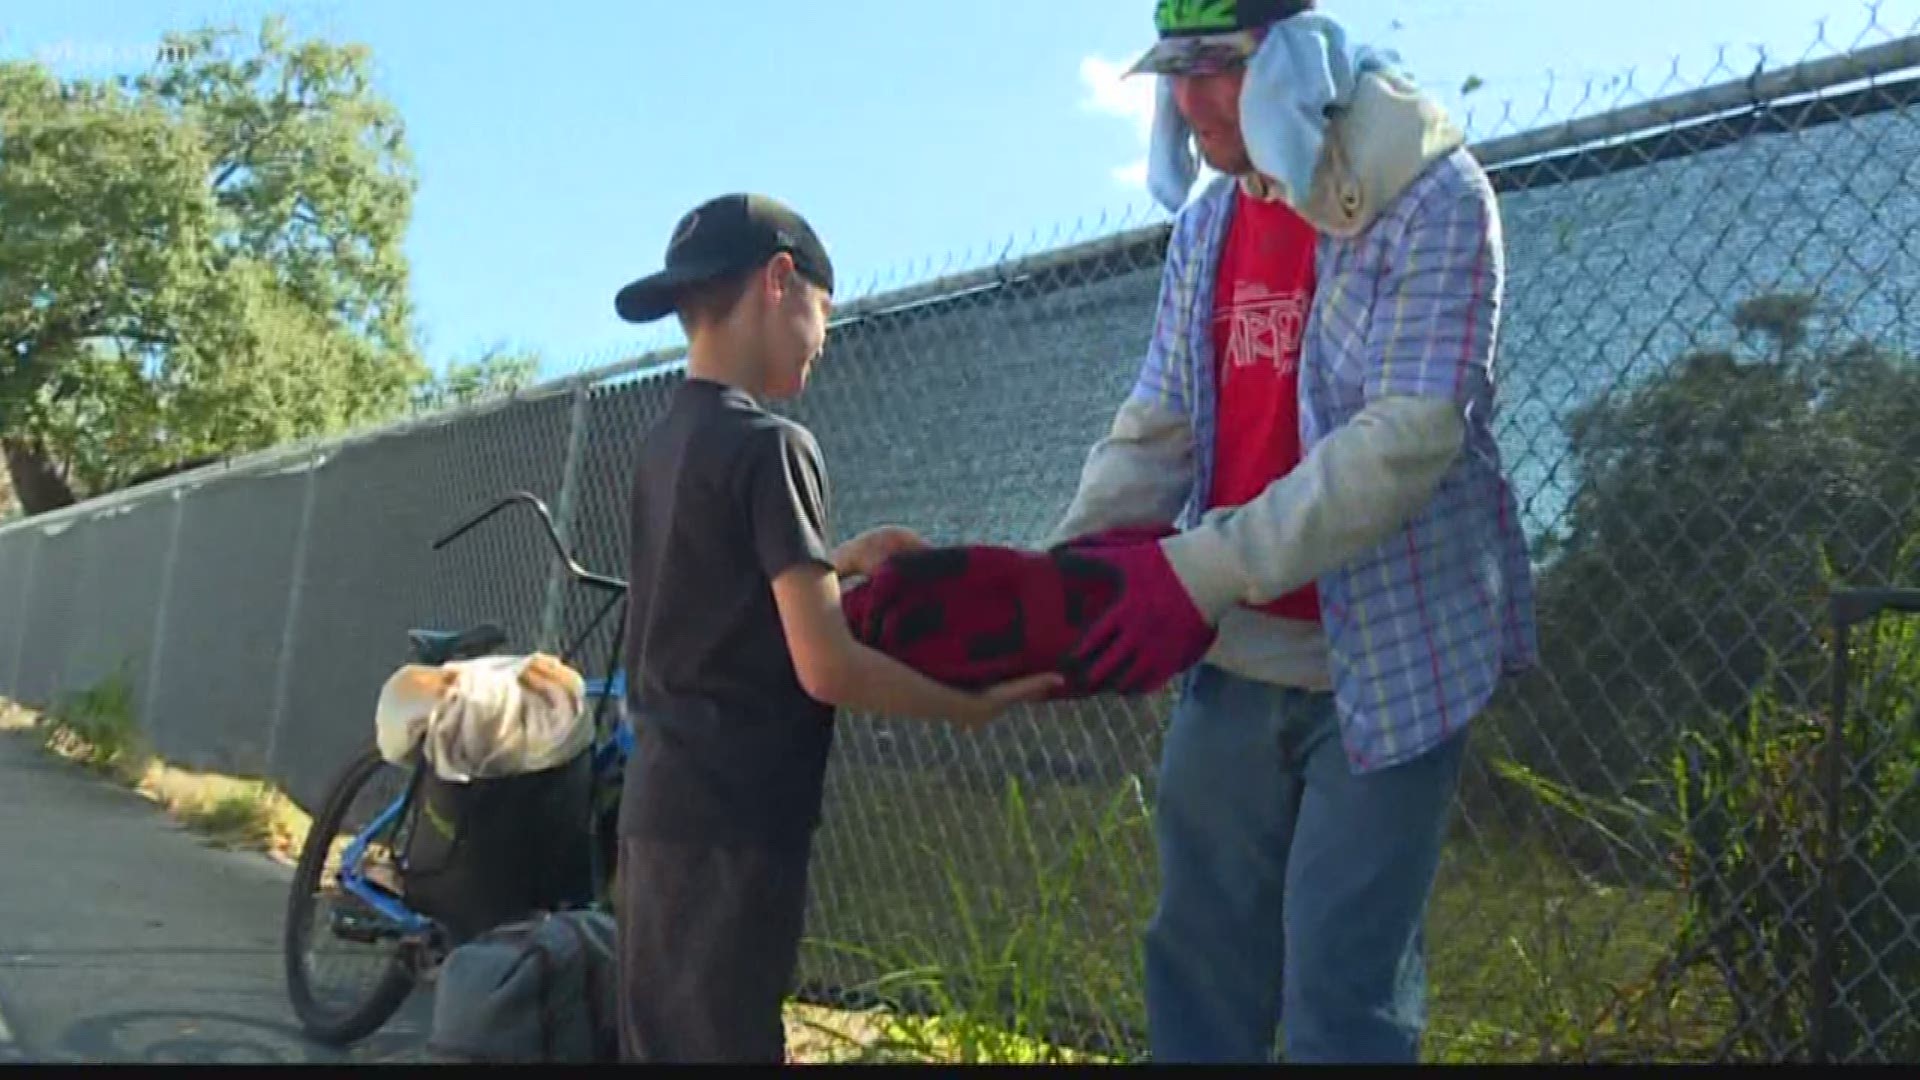 Noah Villa-Wright had a goal to distribute 10 blankets after becoming concerned by low temperatures in Tampa.